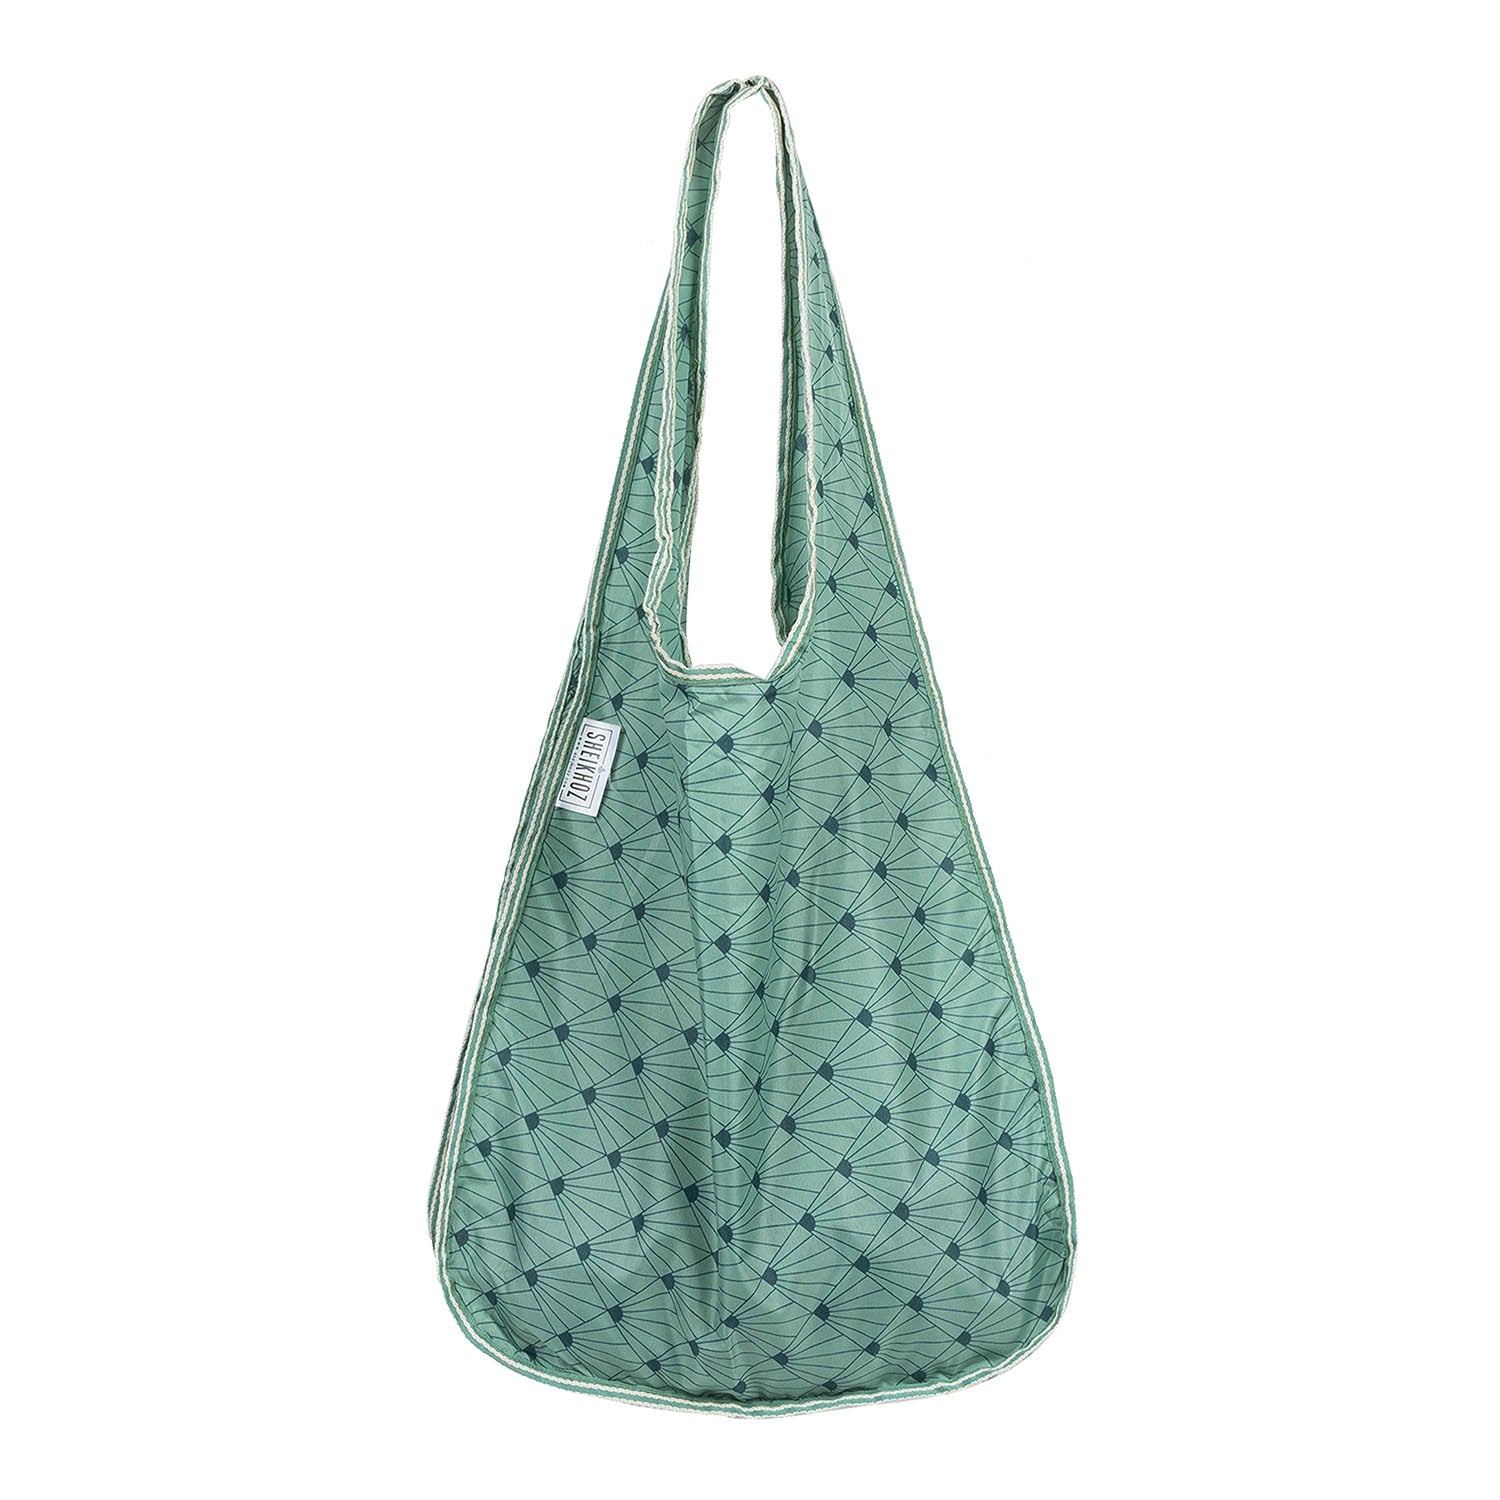 Pop Tote - Green Printed Tote with Piping